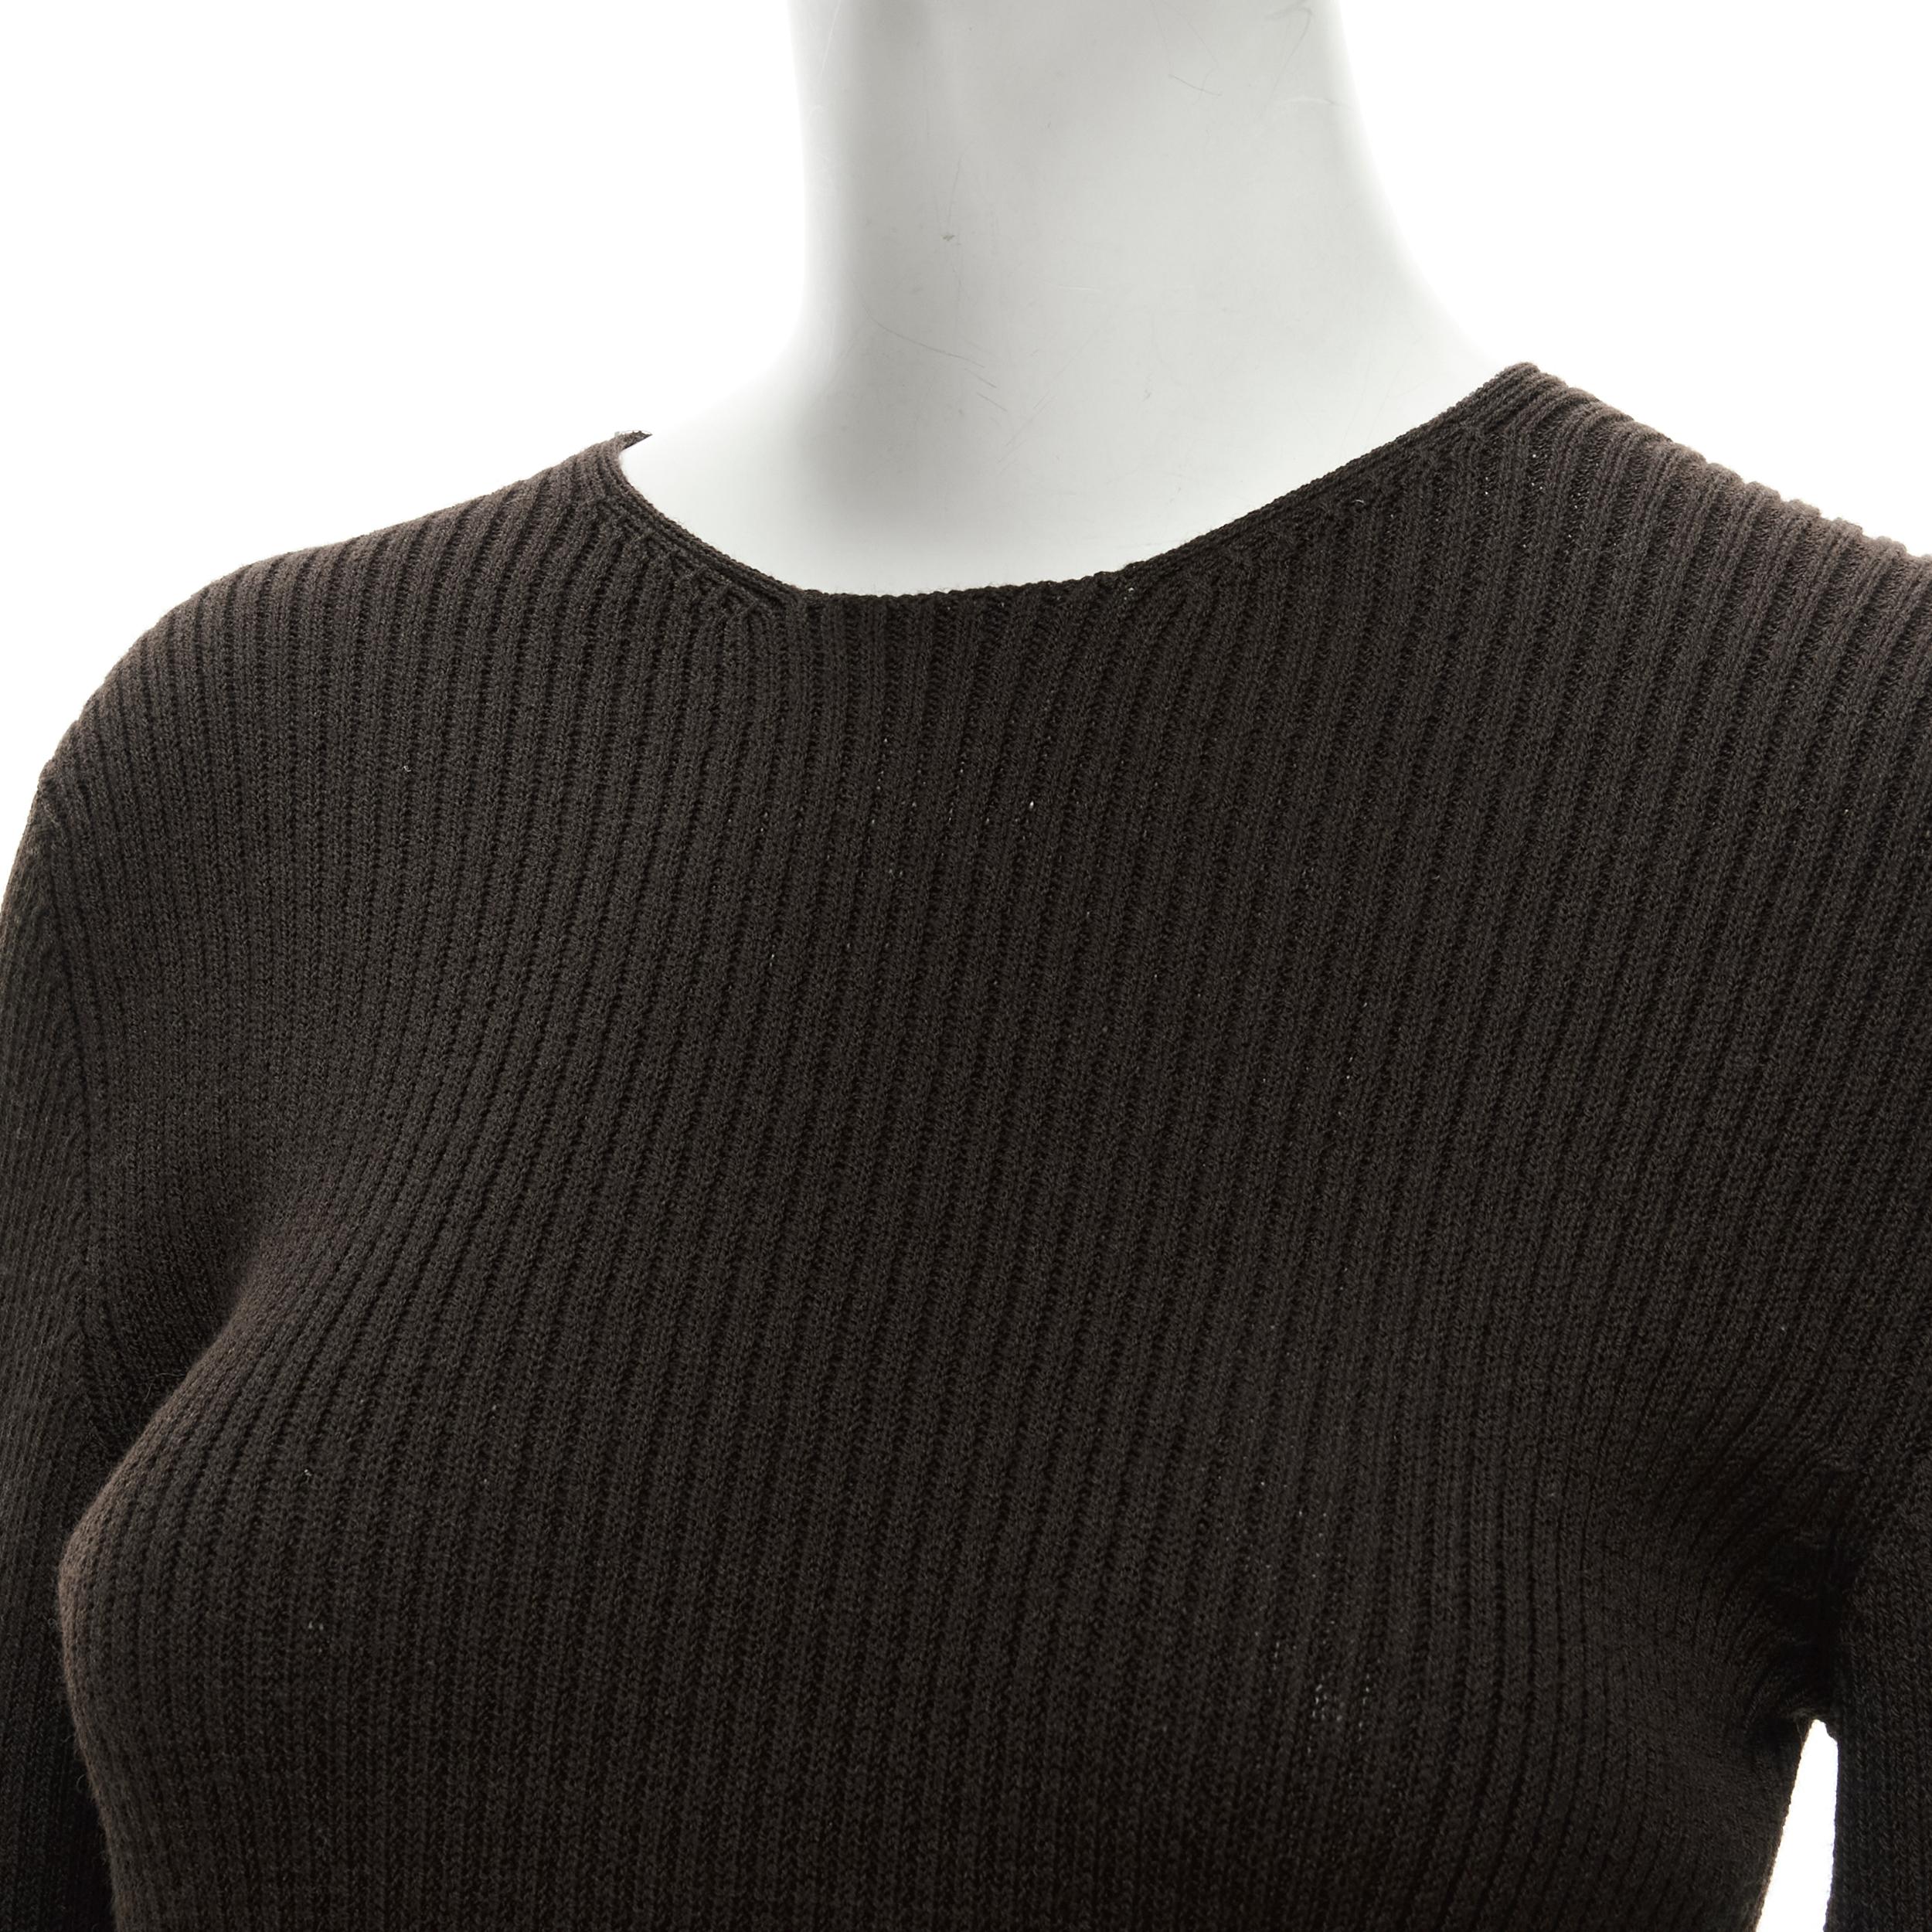 PRADA 100% wool dark brown ribbed crew neck long sleeve sweater top IT42 M
Reference: GIYG/A00256
Brand: Prada
Designer: Miuccia Prada
Material: Wool
Color: Brown
Pattern: Solid
Closure: Pullover
Made in: Italy

CONDITION:
Condition: Excellent, this